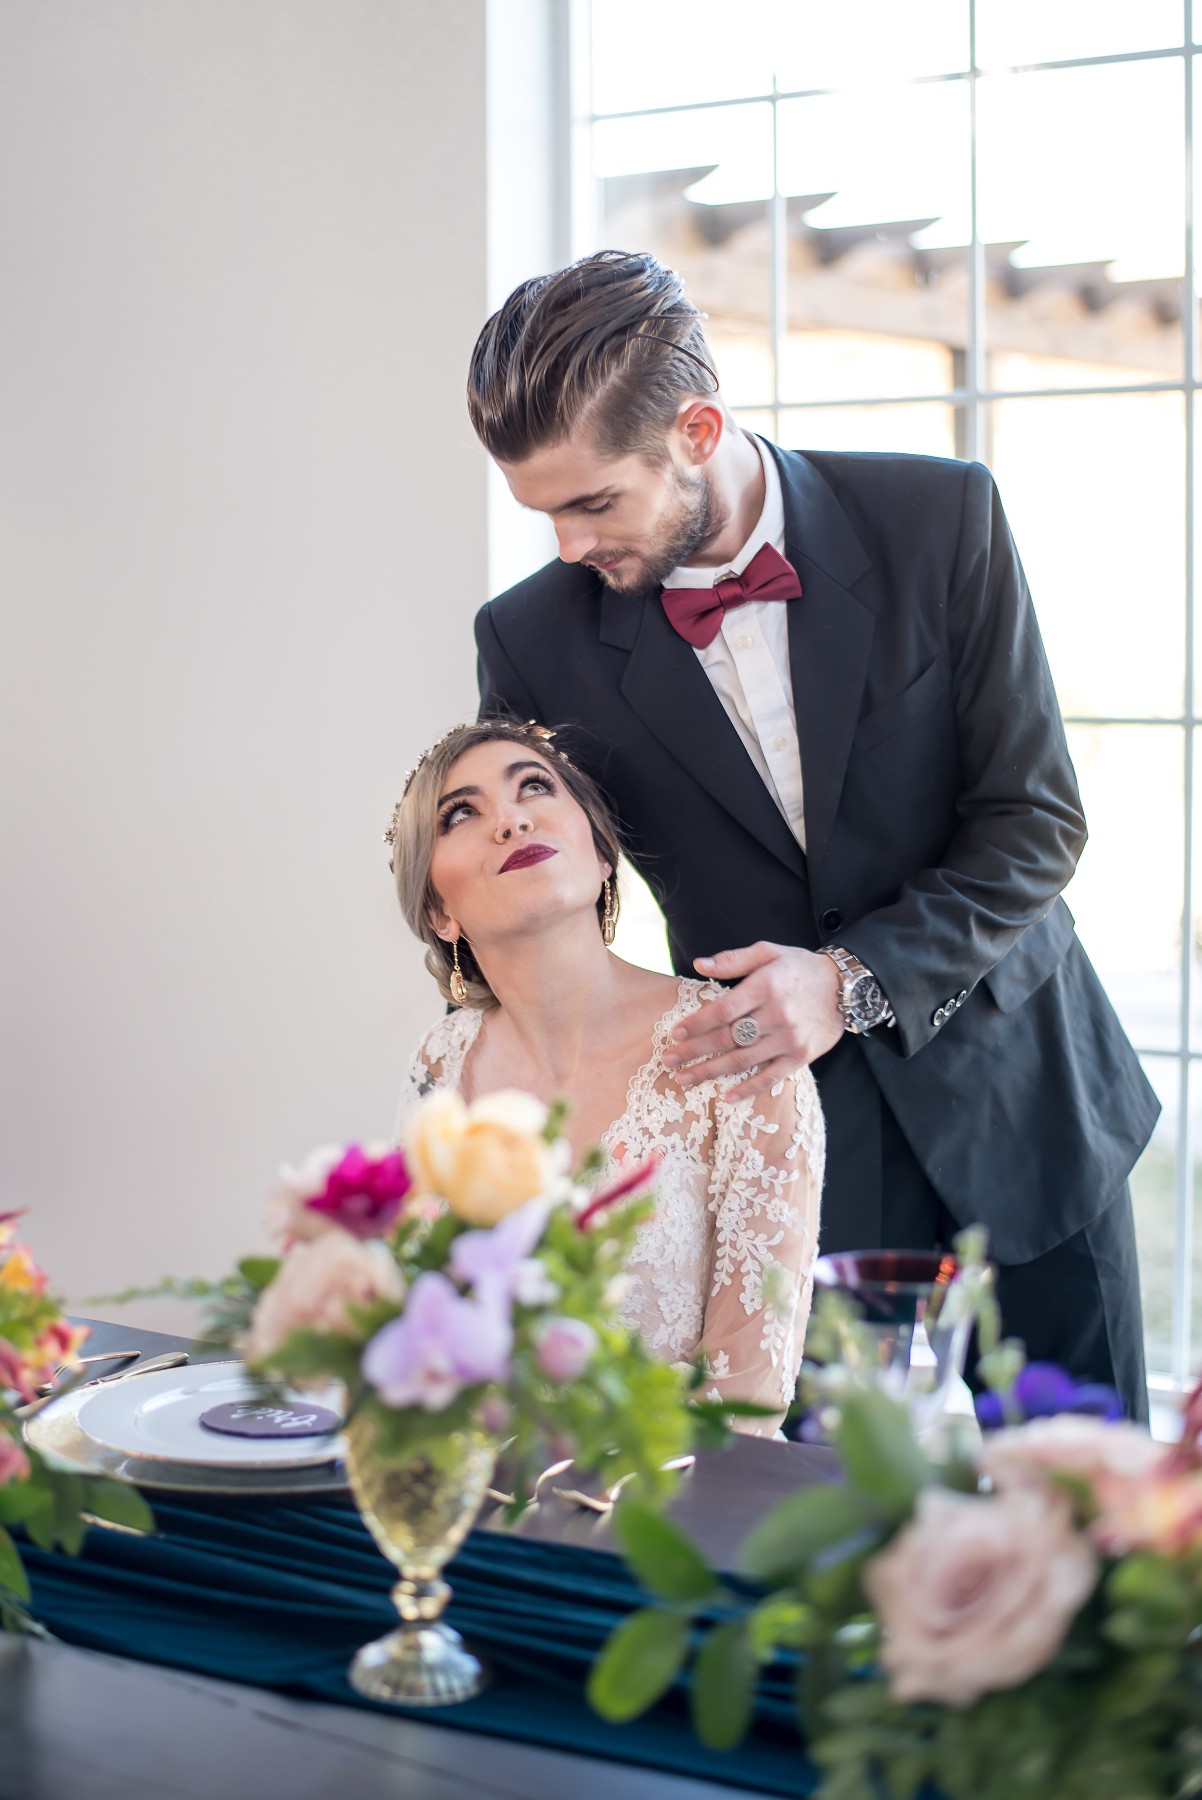 Jewel Coloured Wedding Inspiration with French Country Vibes and a touch of Vintage